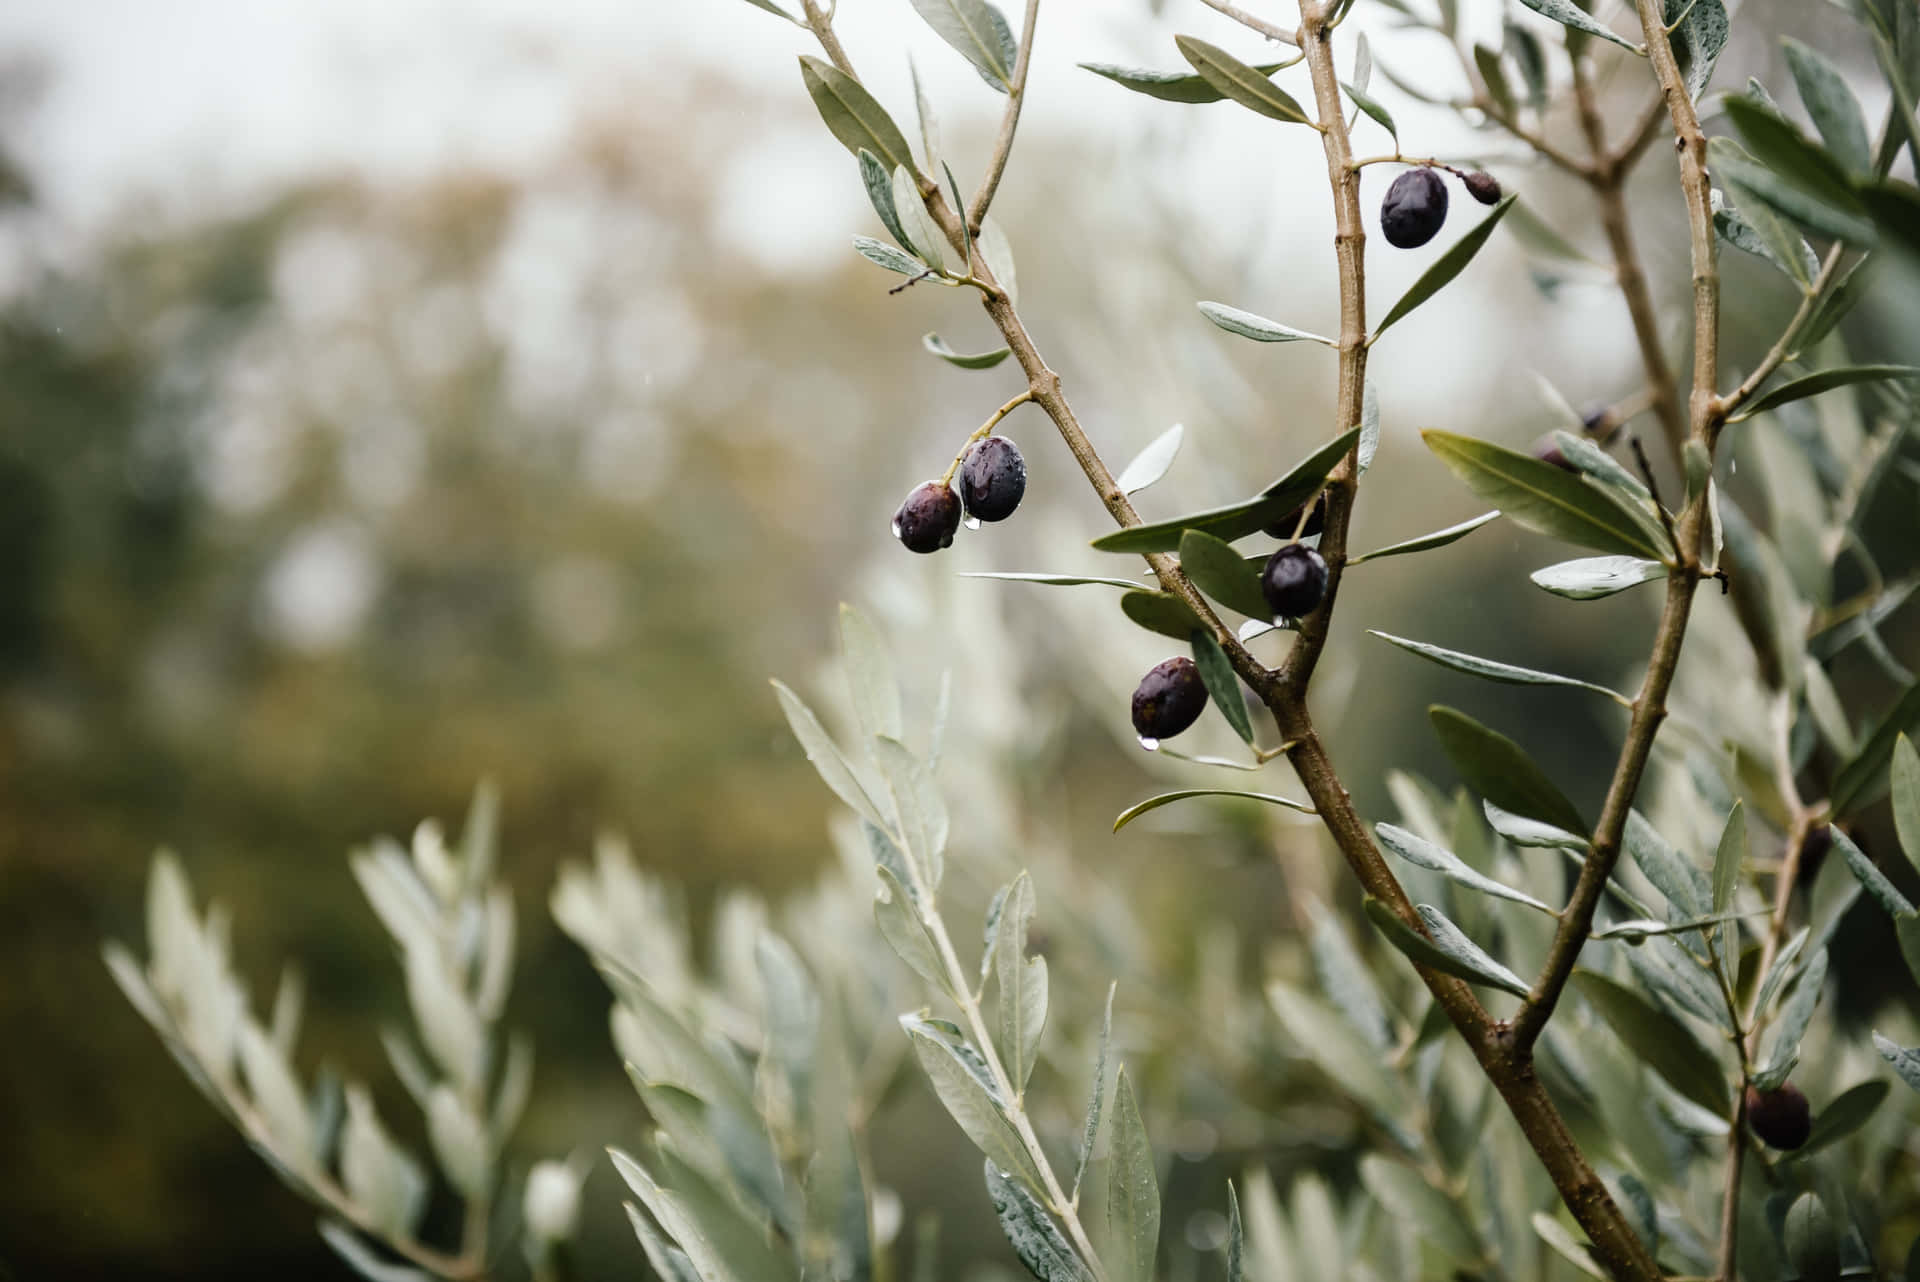 A weather-beaten olive tree overlooking a tranquil Mediterranean sea. Wallpaper